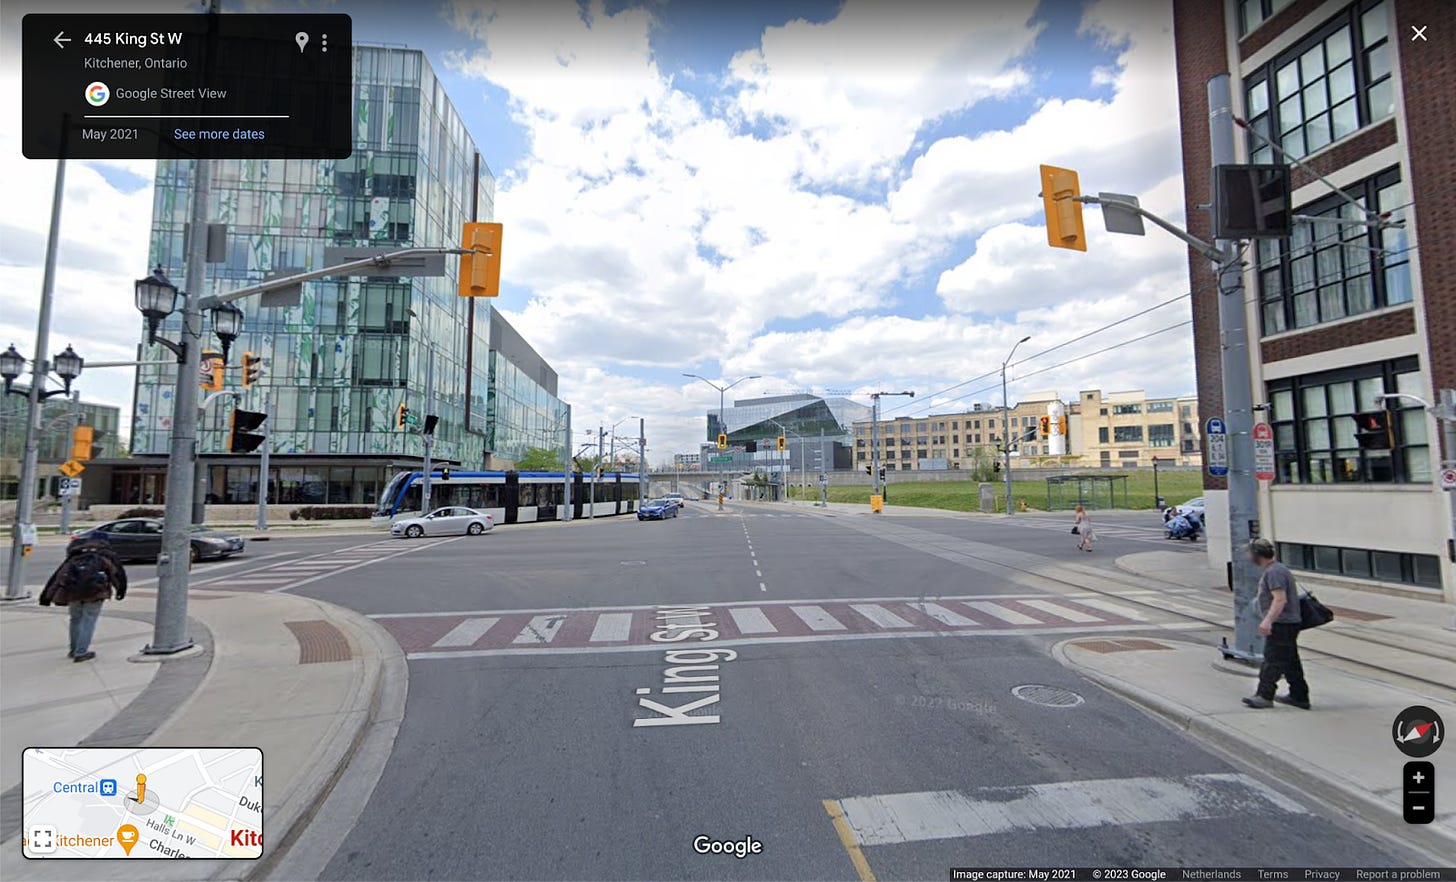 A streetview image of an intersection in Canada, the perspective is in an approach lane about 20 meters back from the stopping line looking towards the intersection.